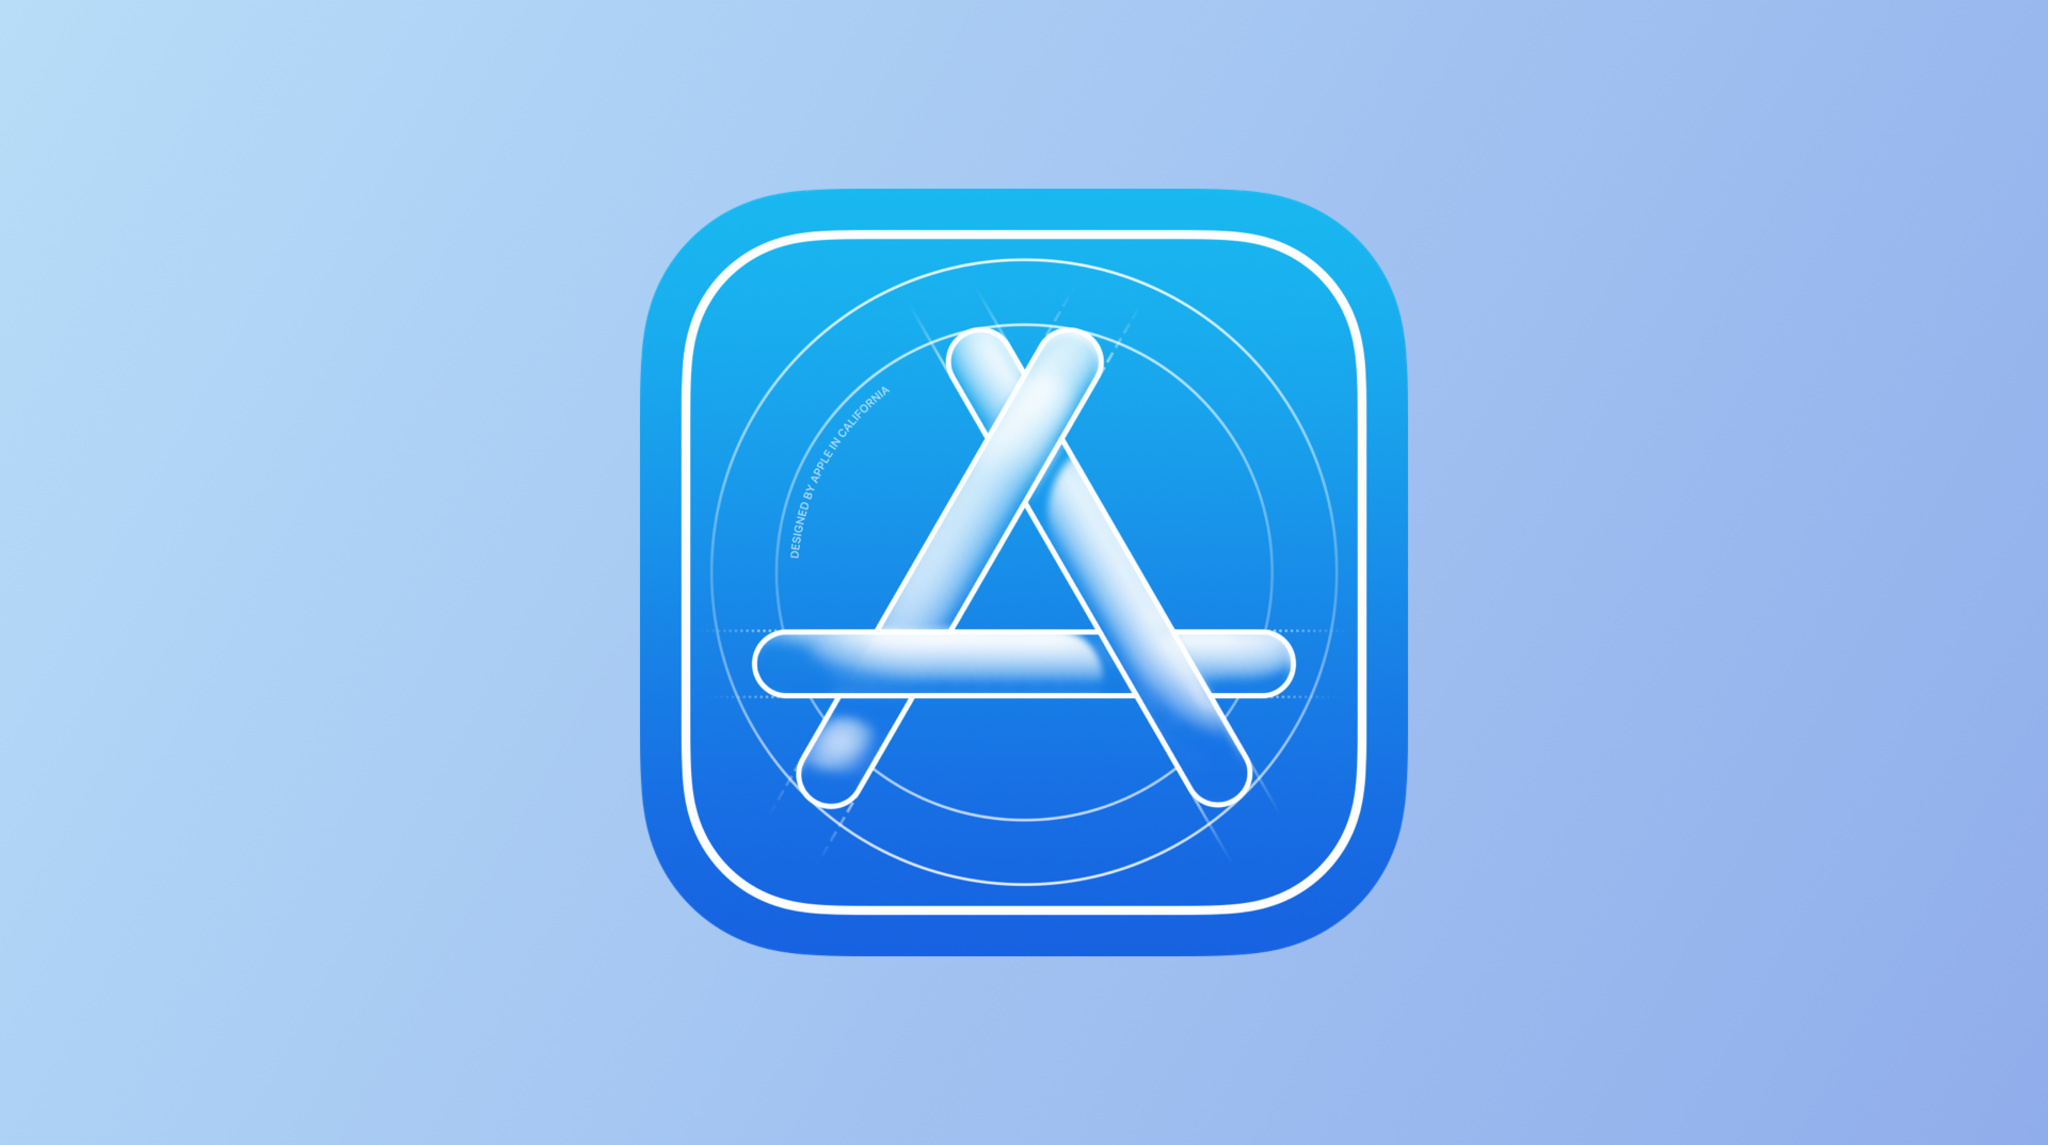 The Apple Developer app icon is displayed in the center of this featured image, set against a light blue gradient in the background